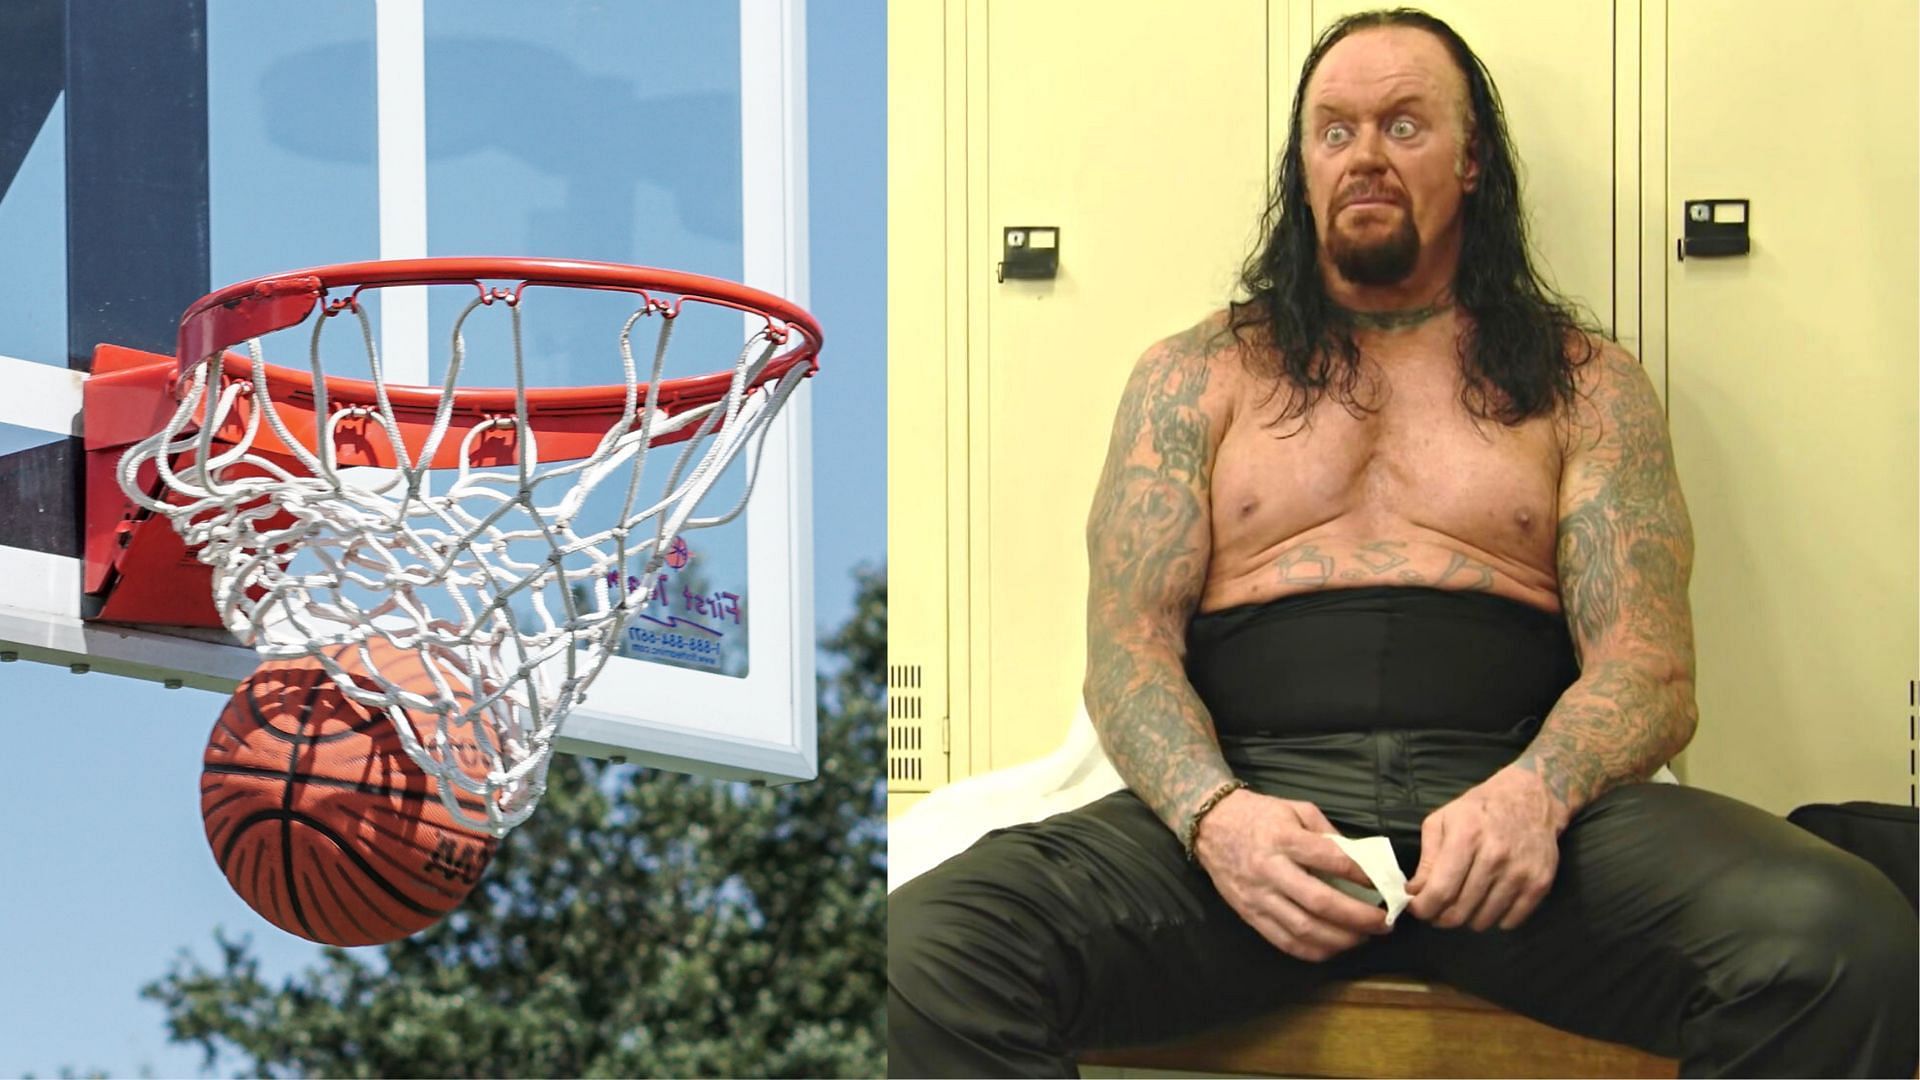 The Undertaker left a career in basketball to pursue professional wrestling.